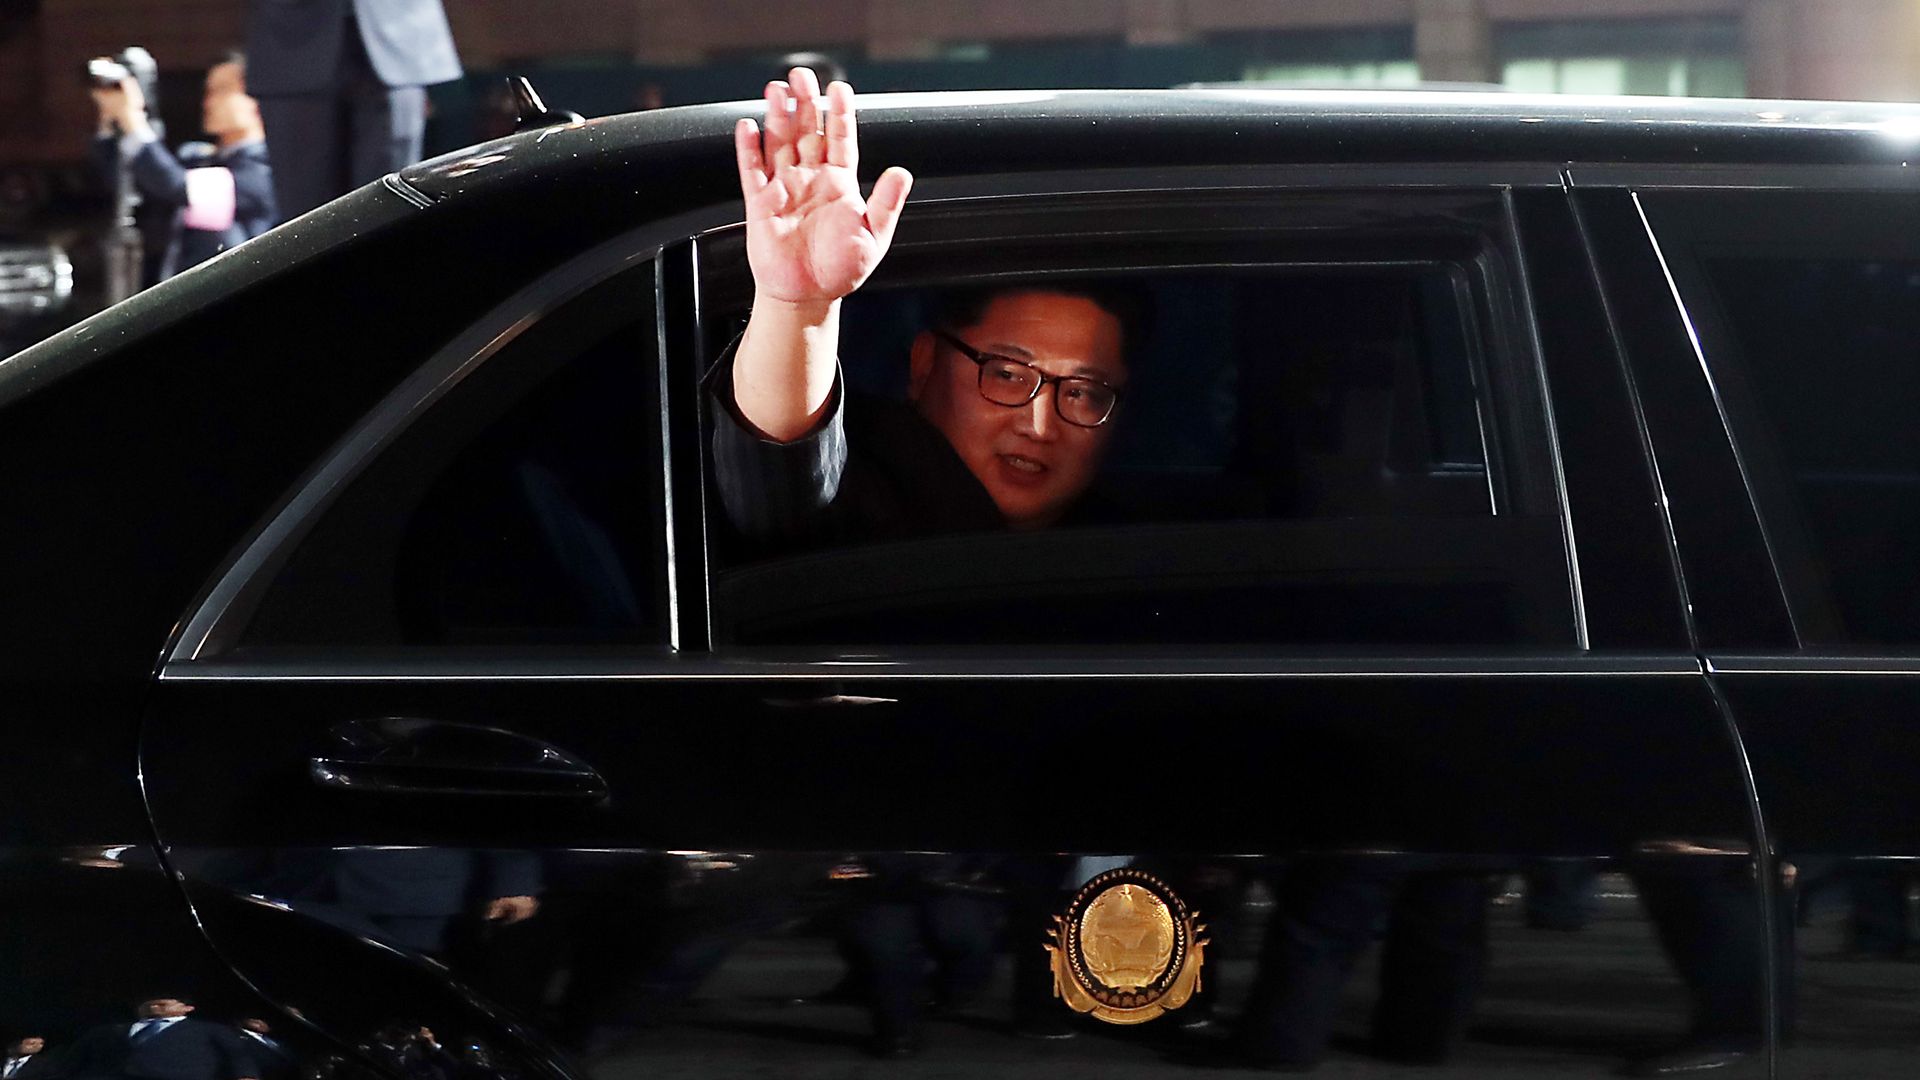 Kim Jong-un waves from a black limo.